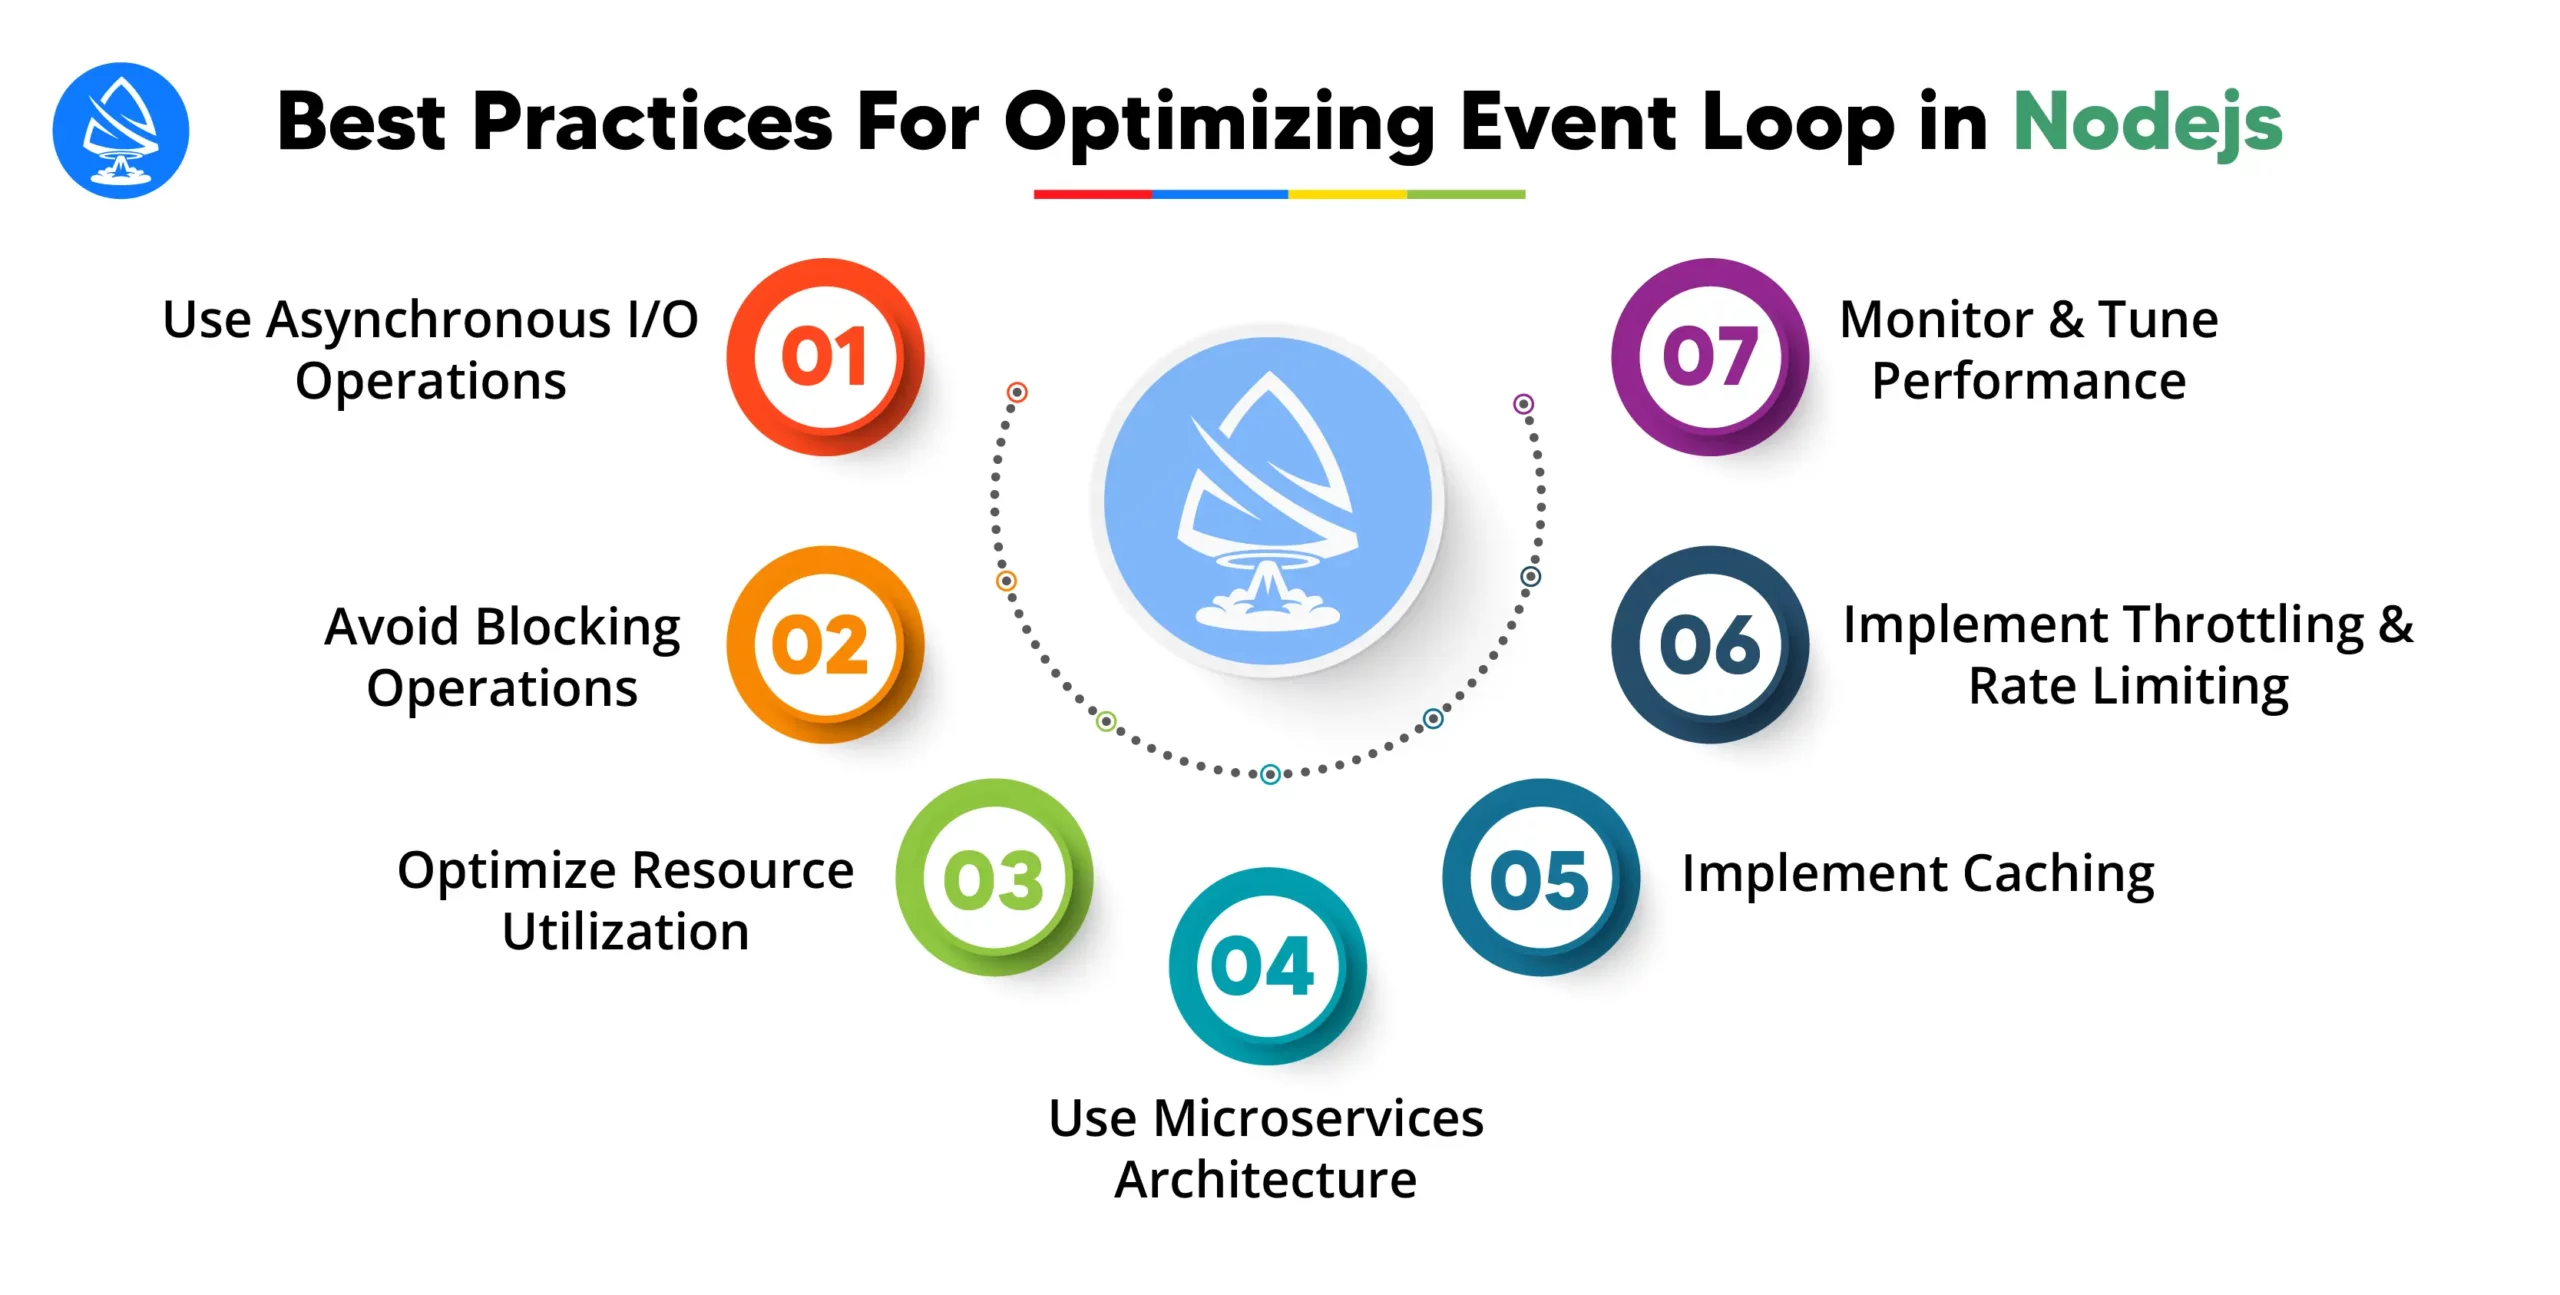 Best Practices For Optimizing The Event Loop in Node js 